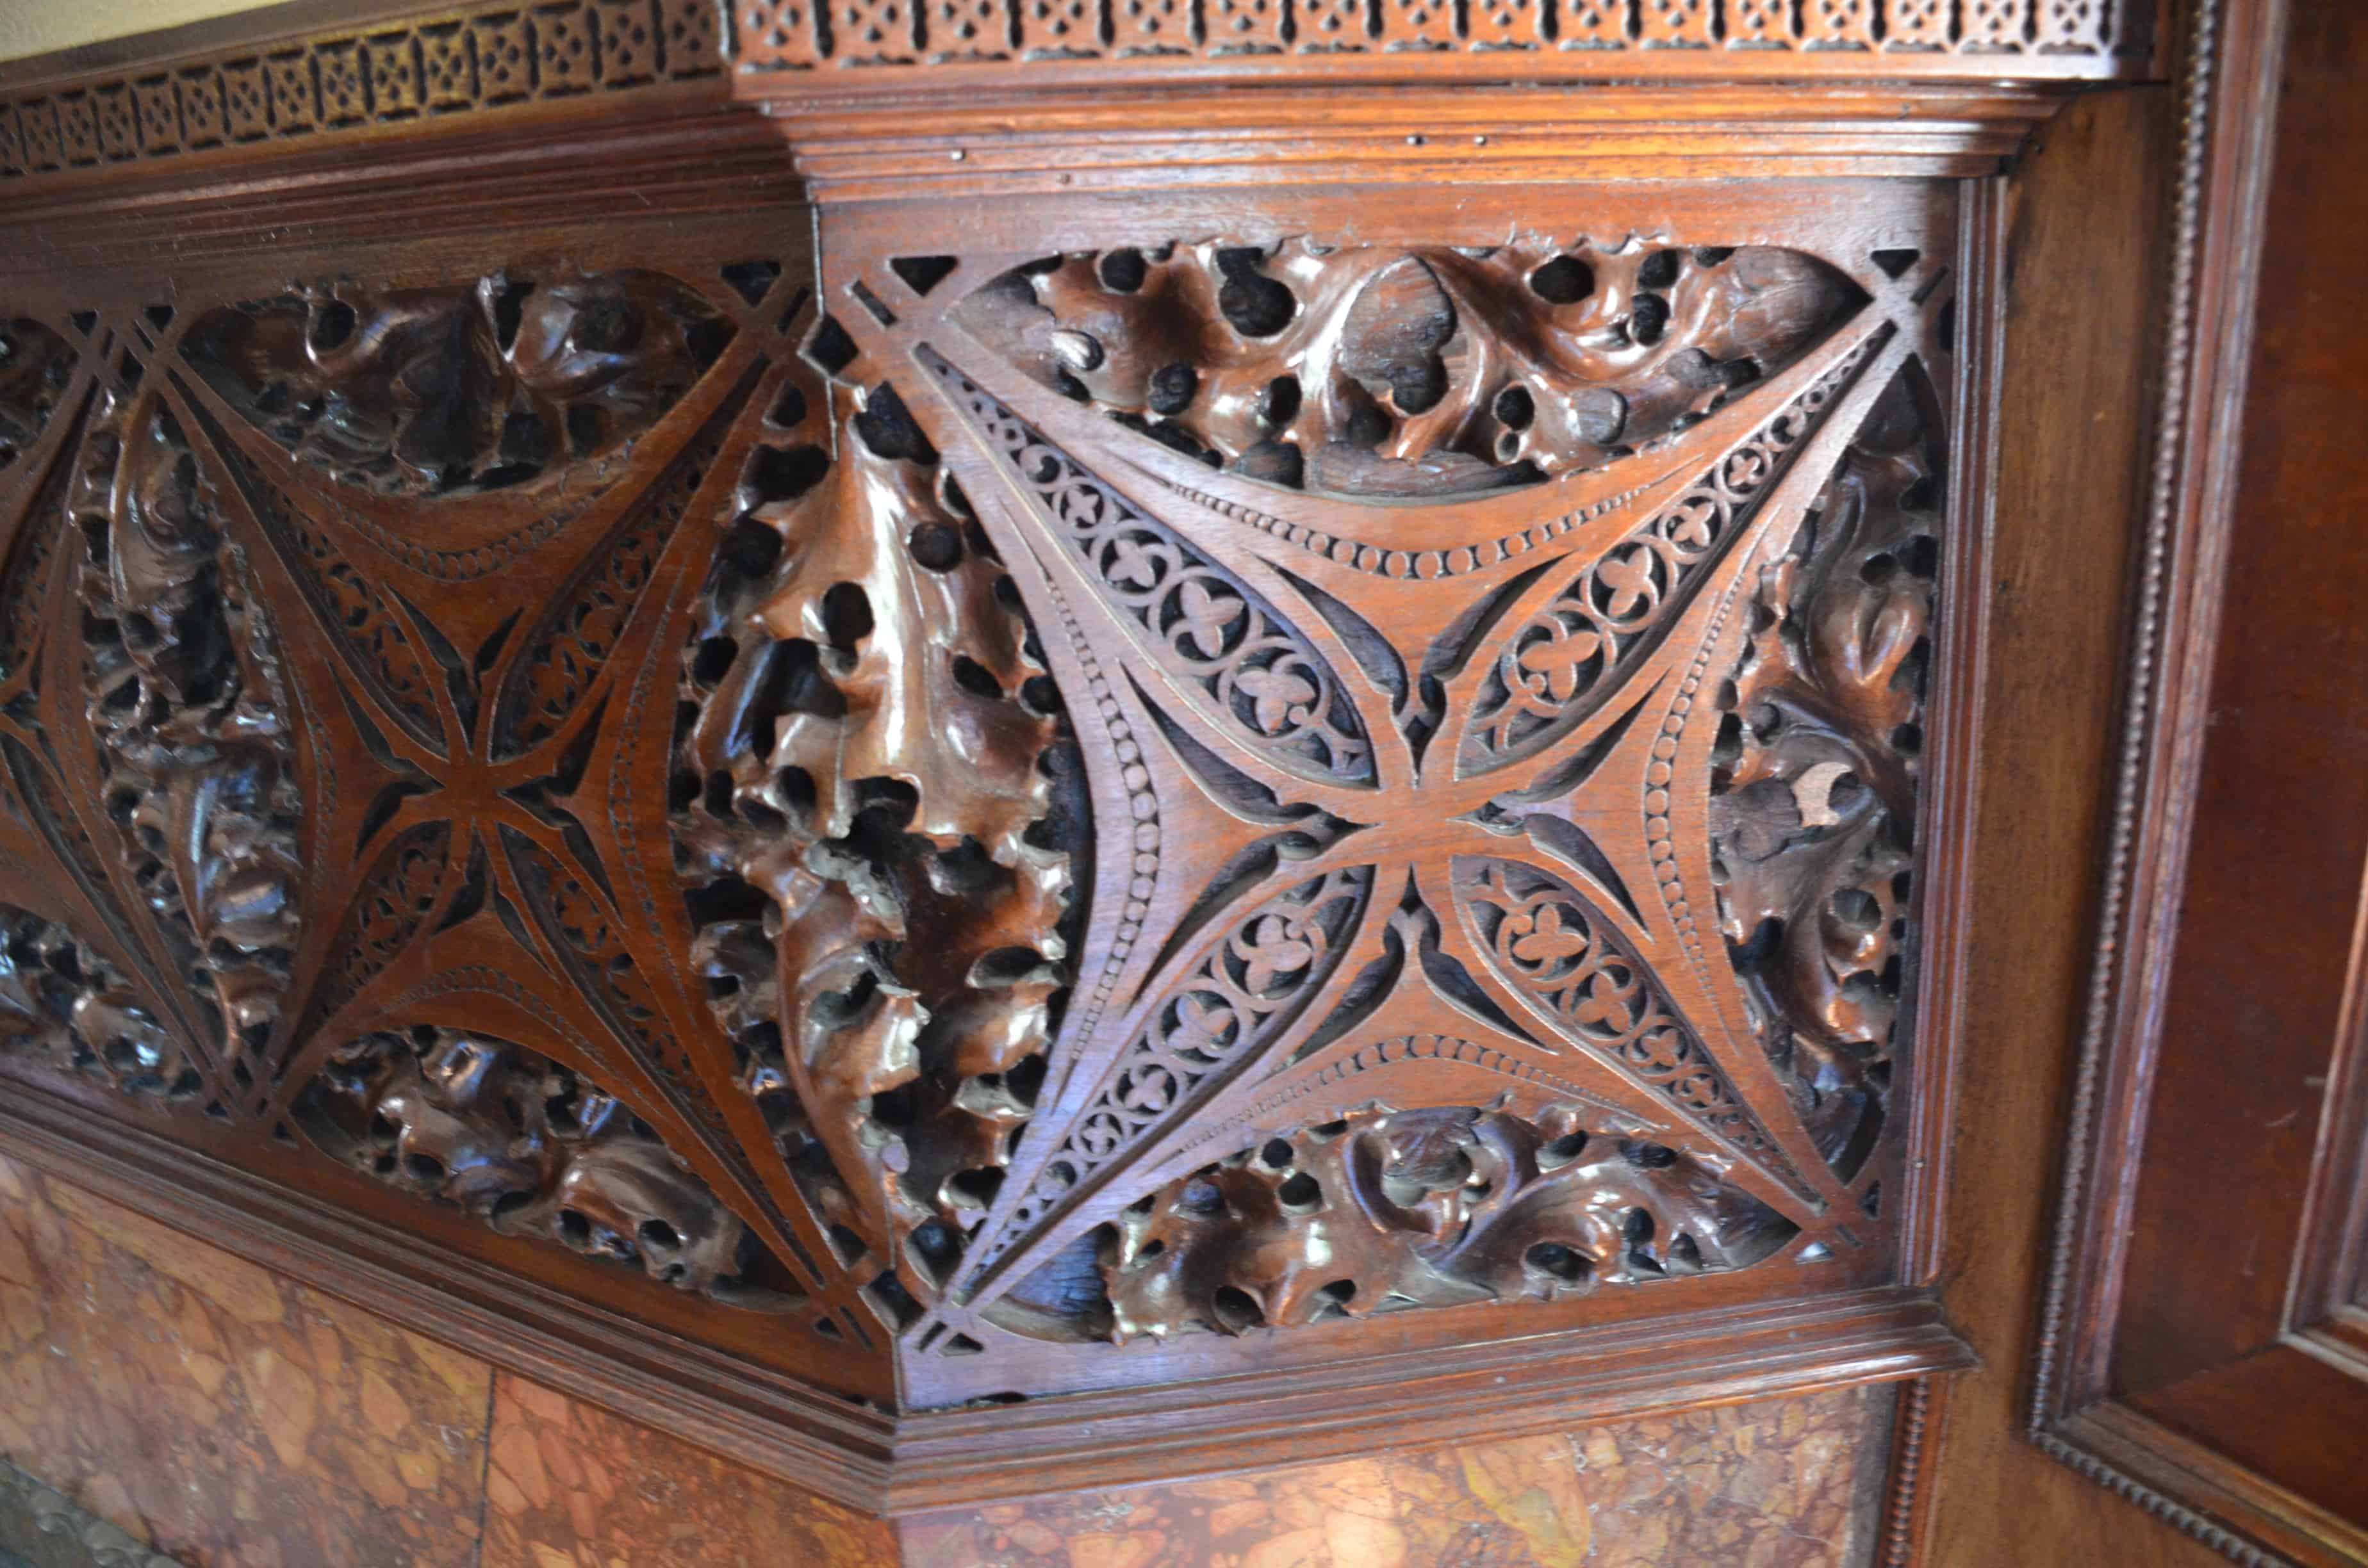 Woodwork on the dining room fireplace of the Charnley-Persky House in Chicago, Illinois